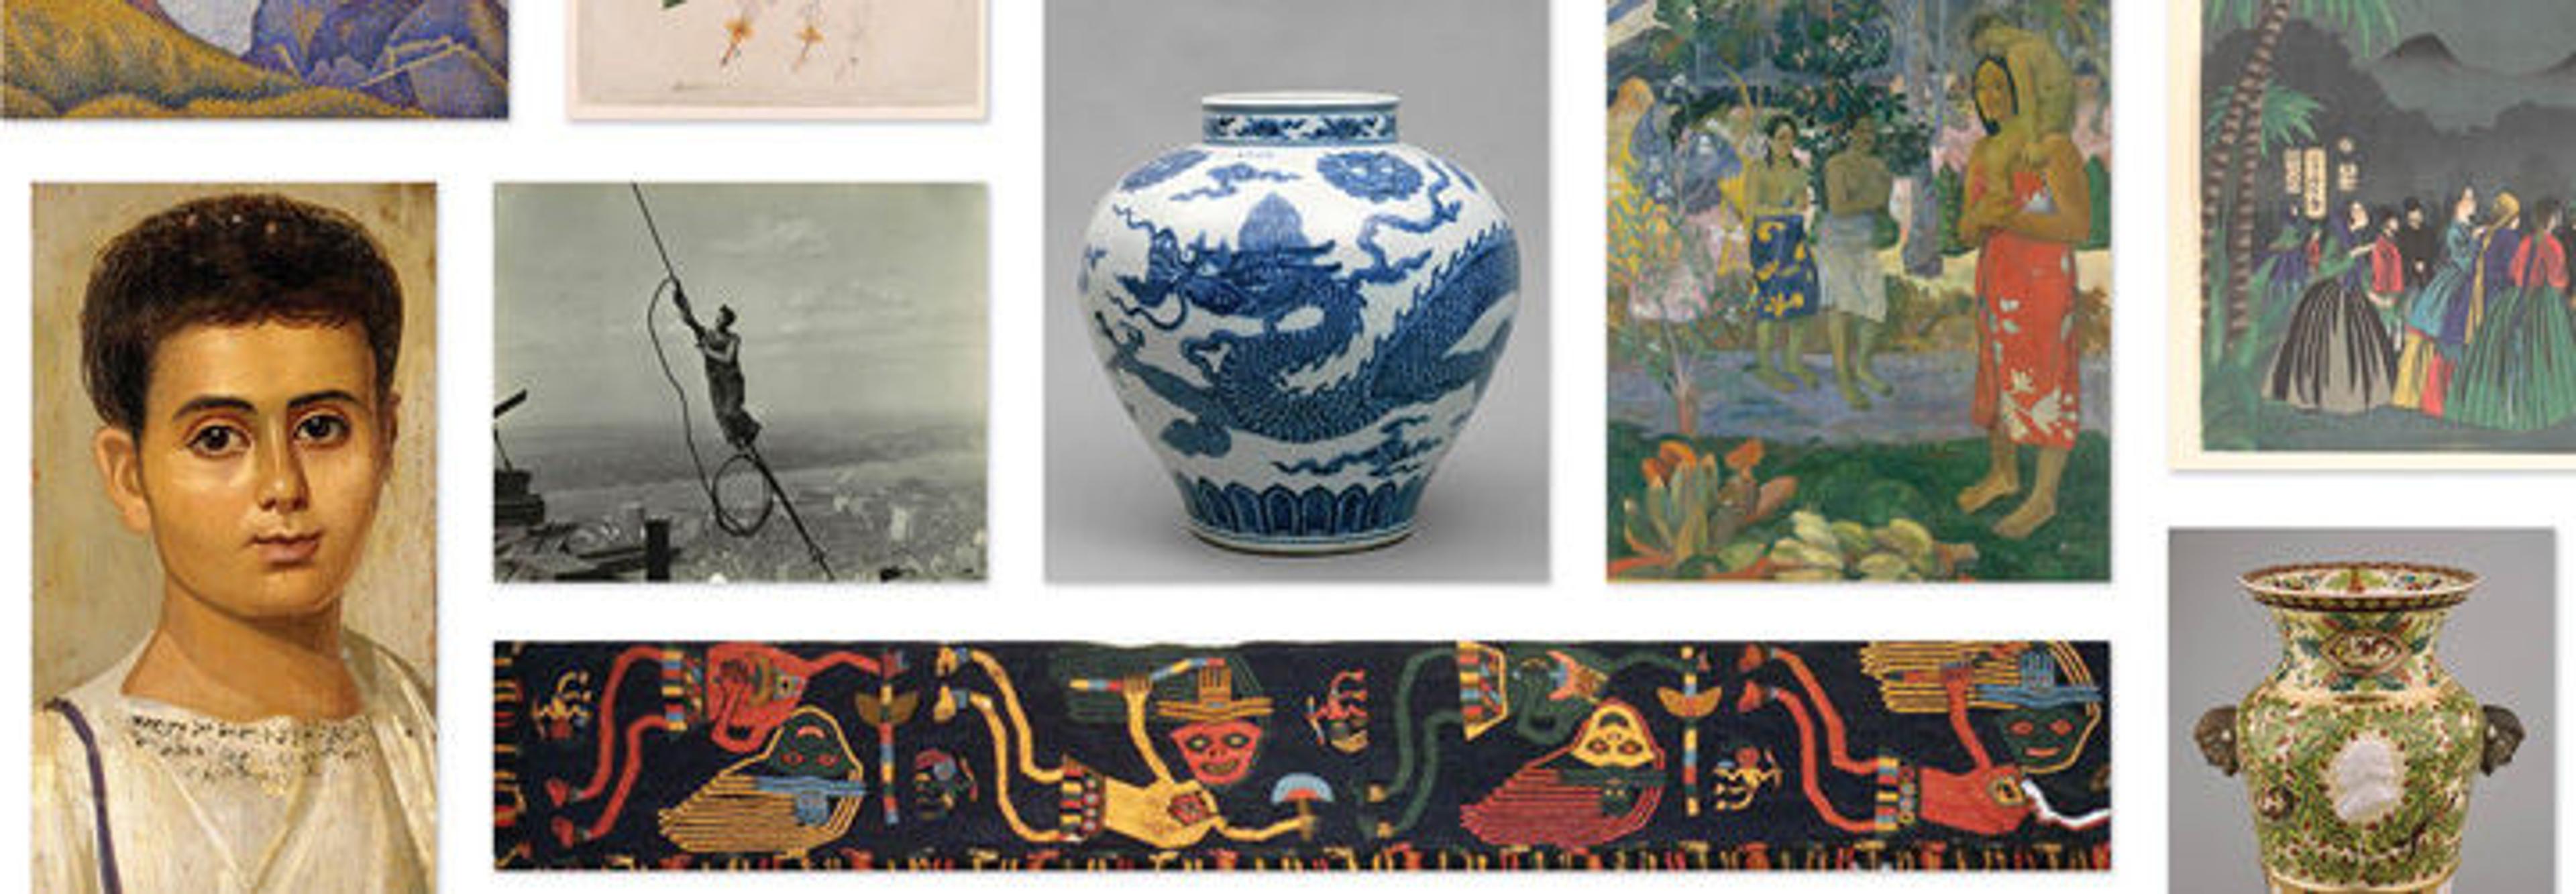 Collage of images of public-domain artworks in The Met collection